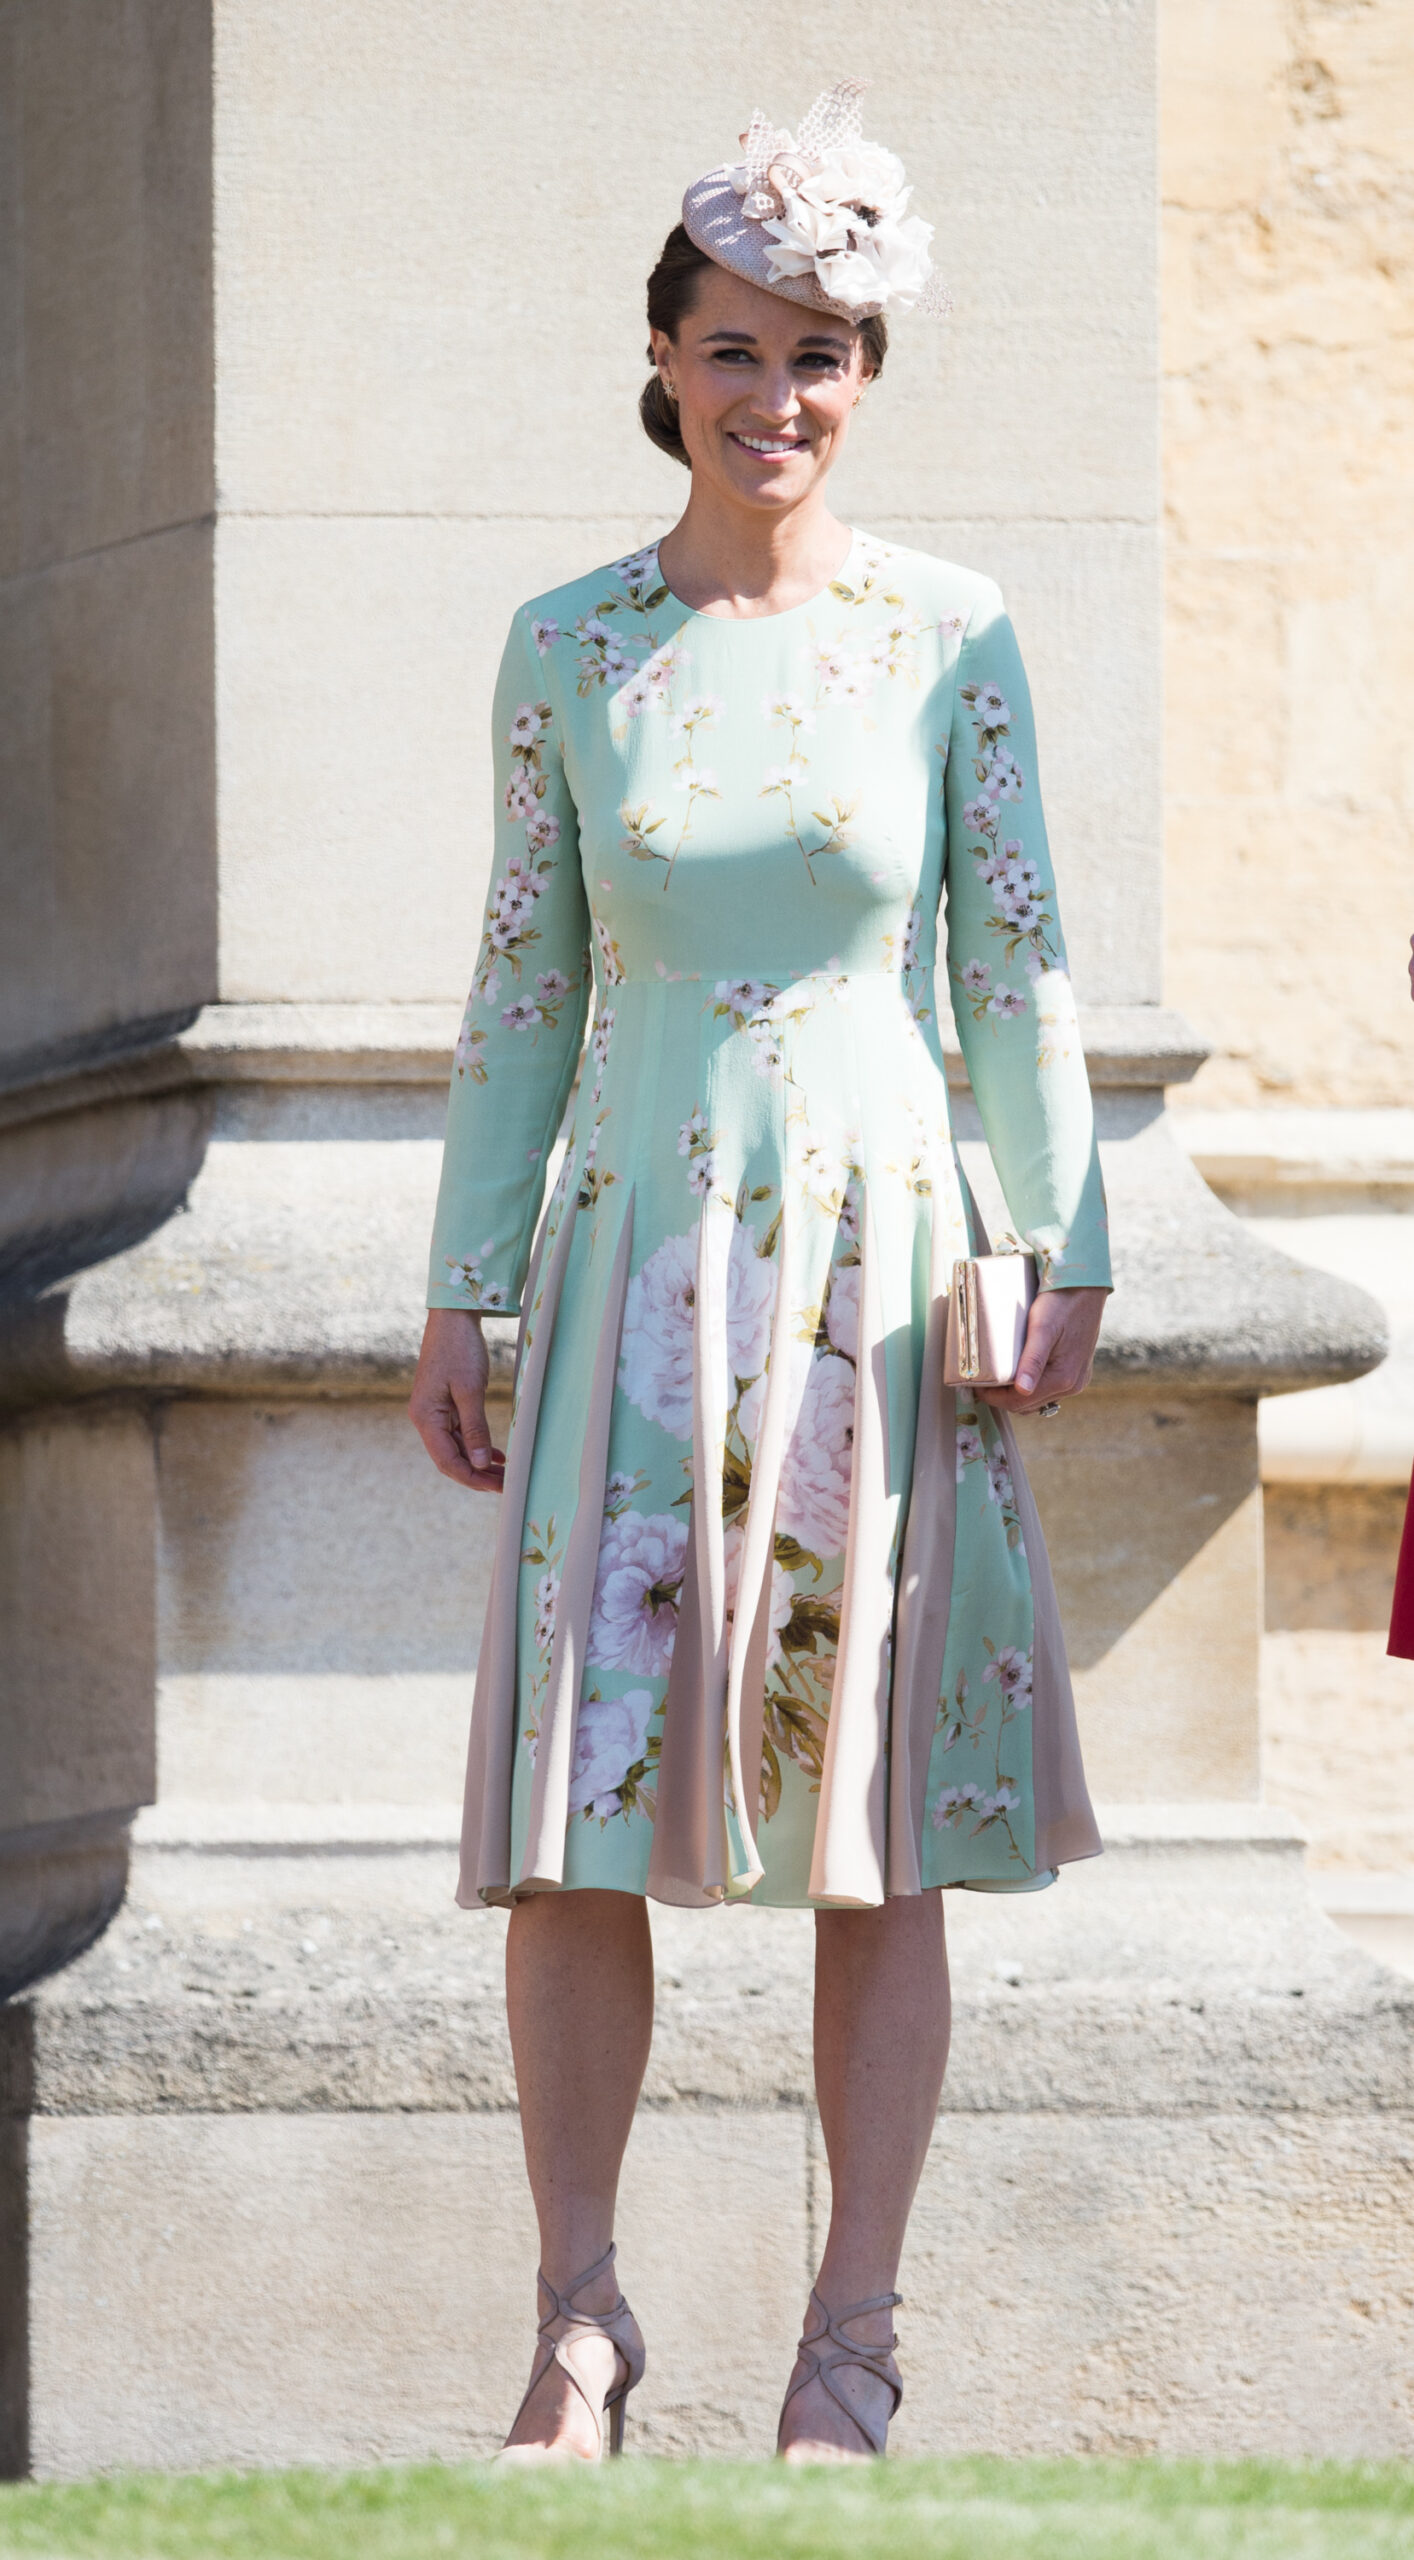 Pippa Middleton's dress at Harry and Meghan's wedding